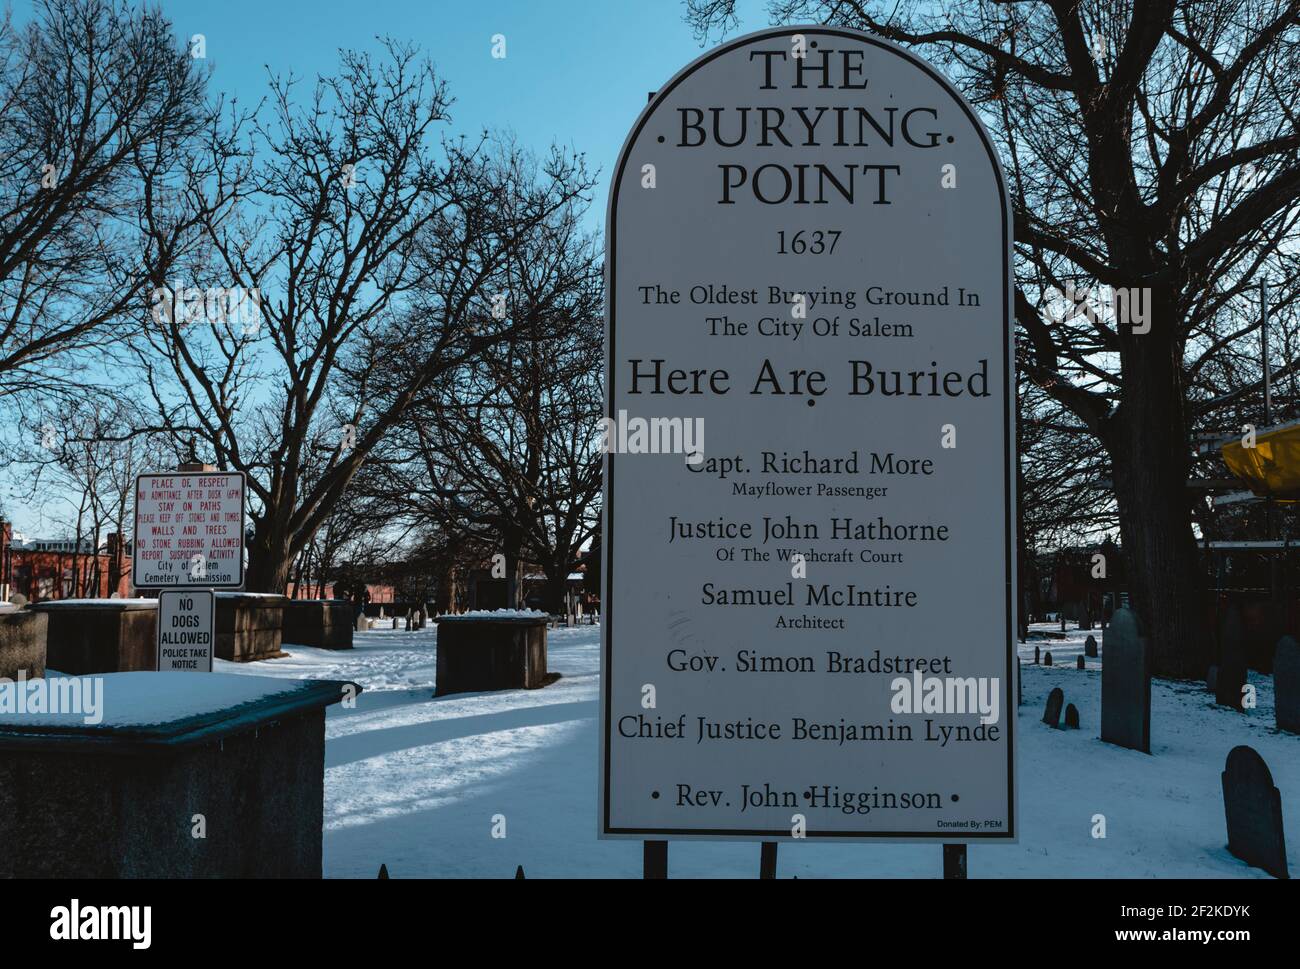 Winter in Witch City of Salem, Essex, New England, Boston, United States of America, Massachusetts, Graveyard of Witch burnings, Gravestone, Stock Photo